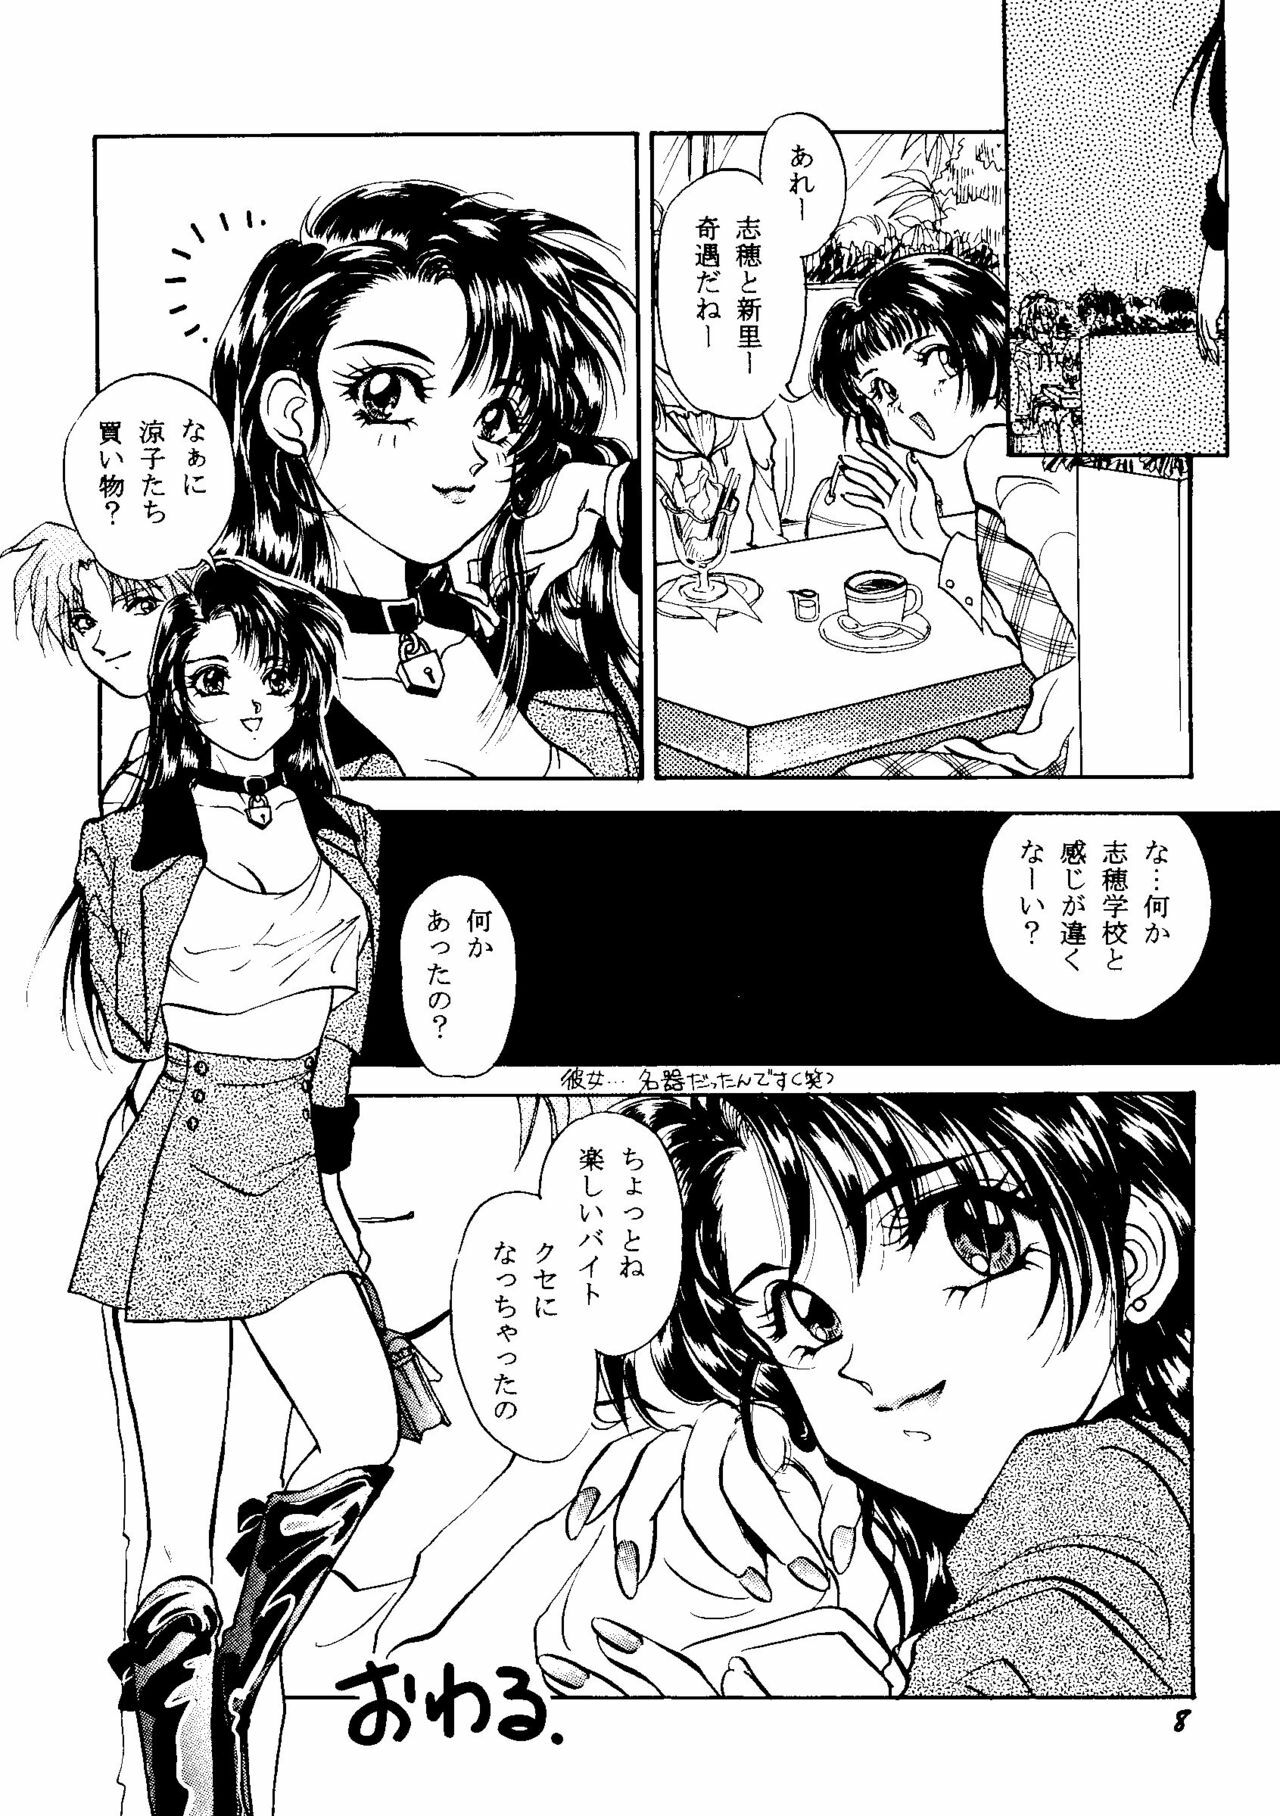 [Anthology] CUTE 1 Koi no Russian Roulette (Various) page 10 full